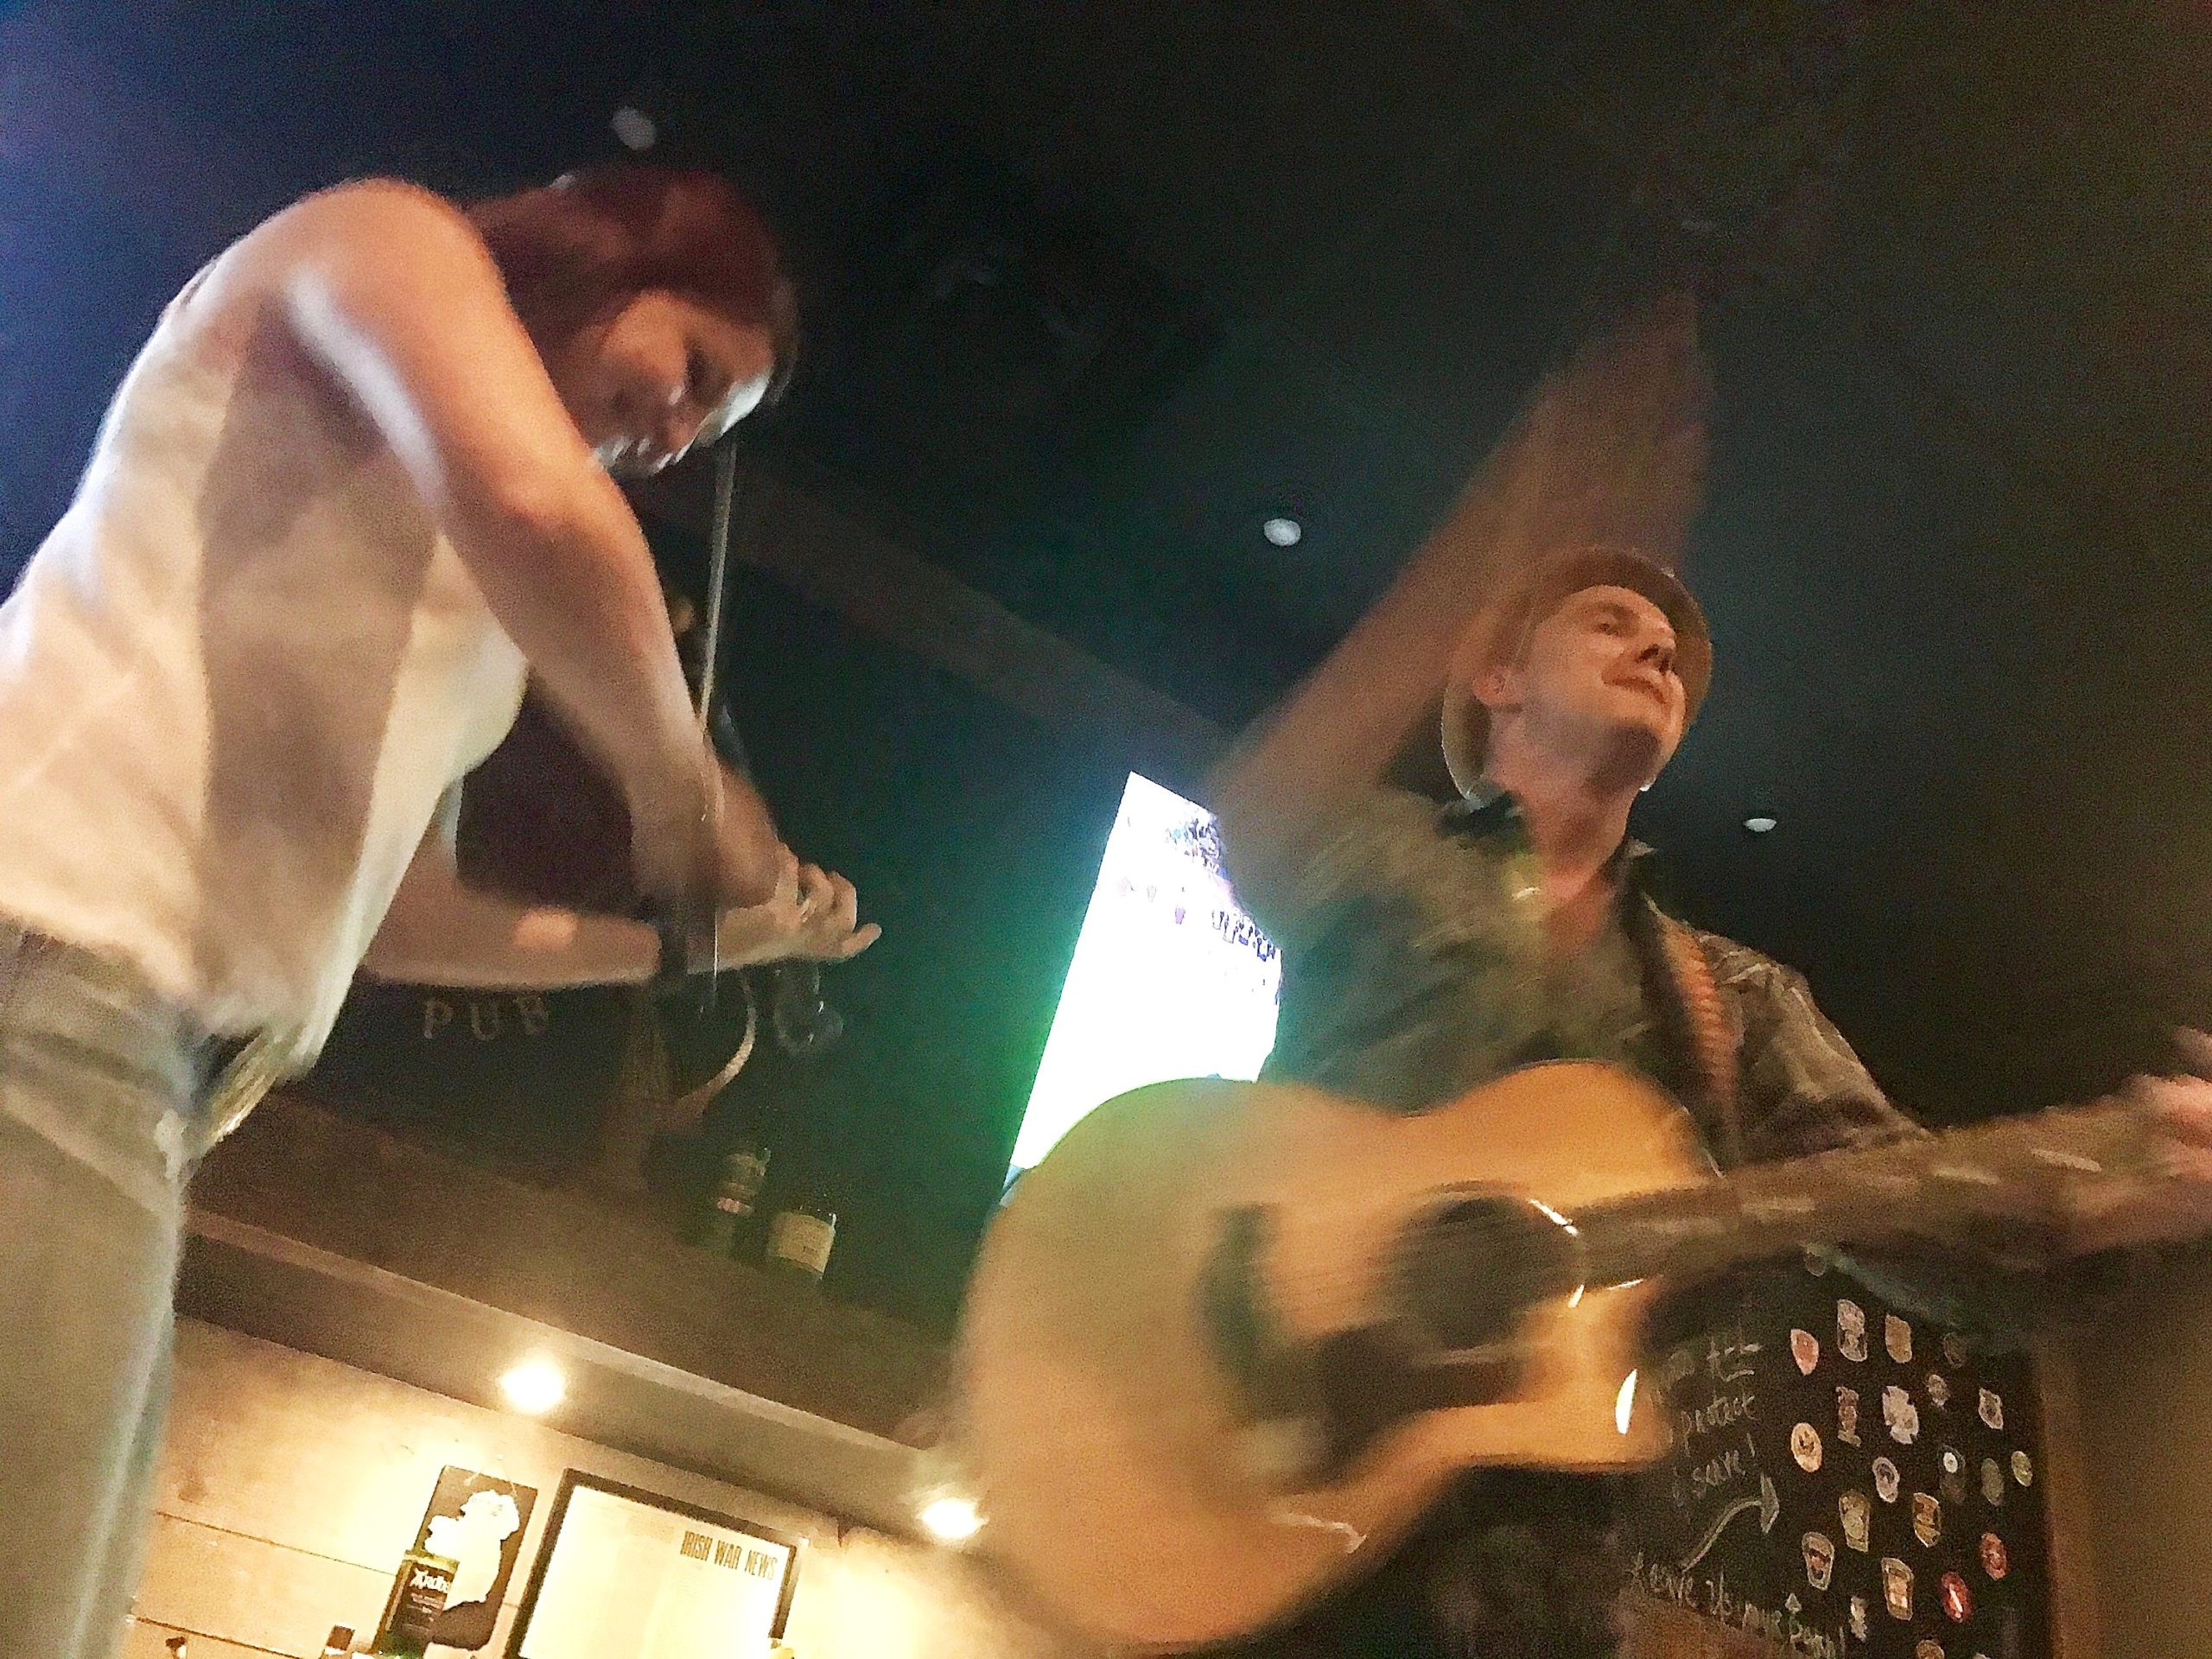 playing on the bar